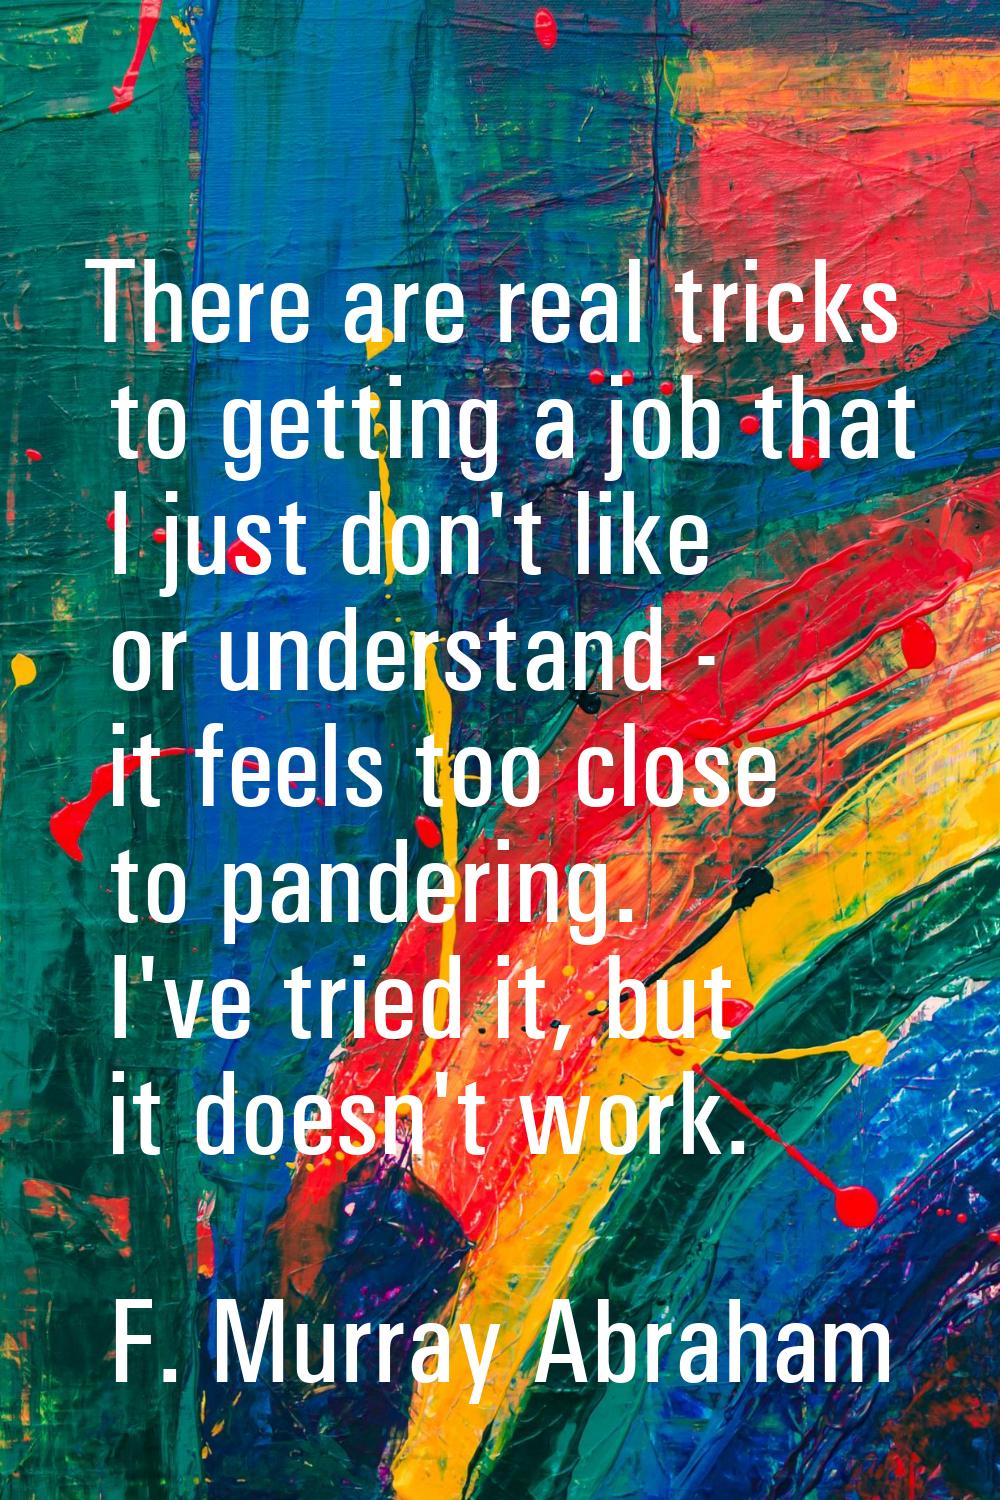 There are real tricks to getting a job that I just don't like or understand - it feels too close to